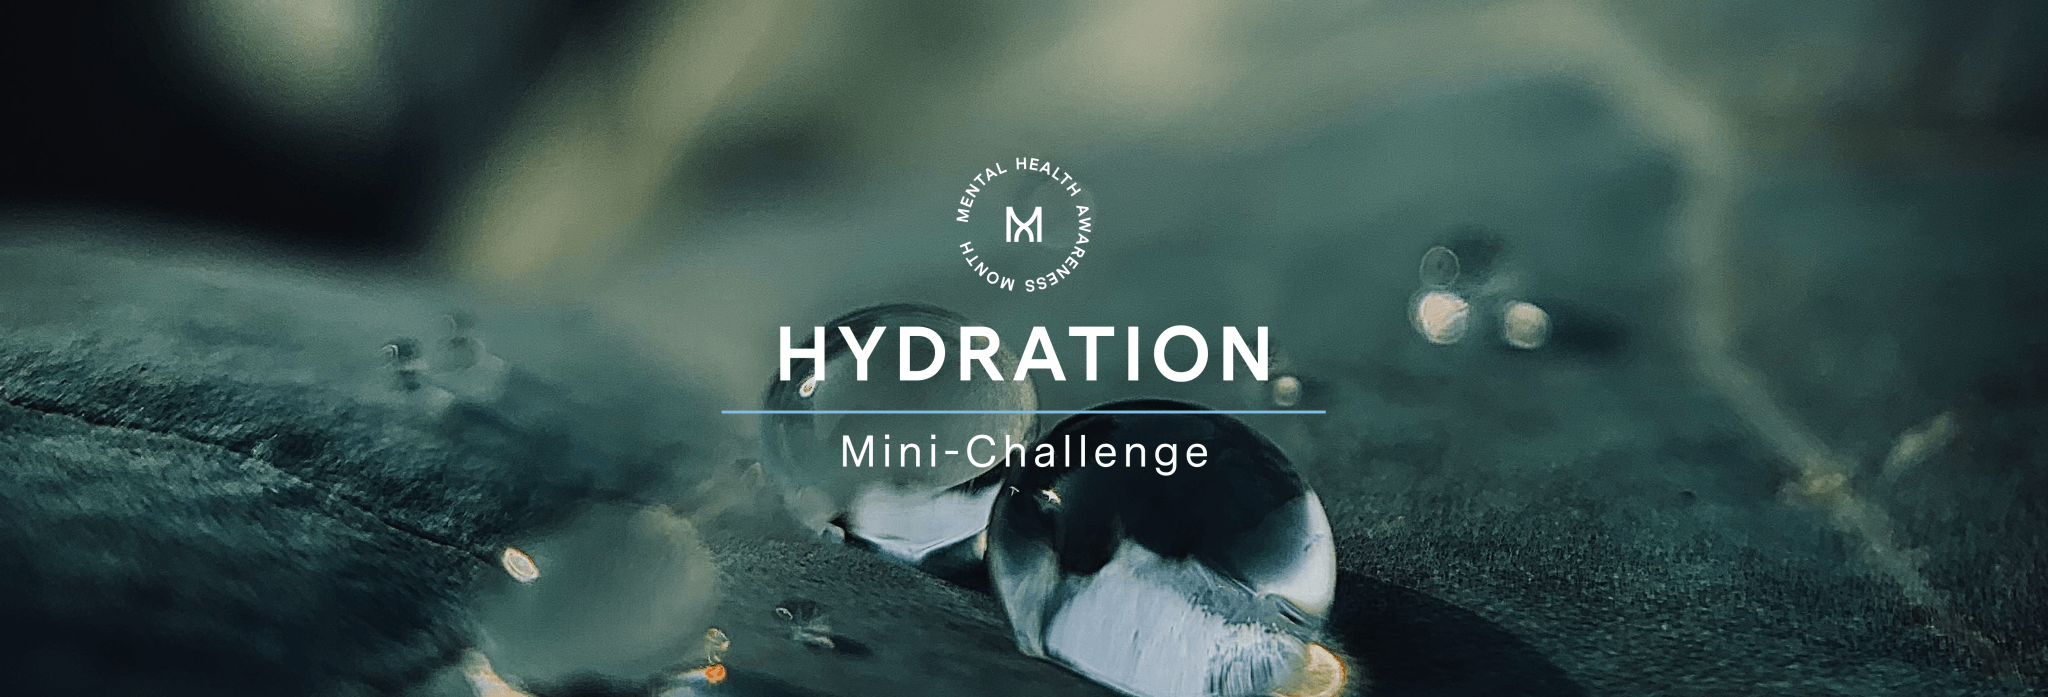 Hydration Mini-Challenge: Week 1 of Madefor's Mental Health Month | Madefor